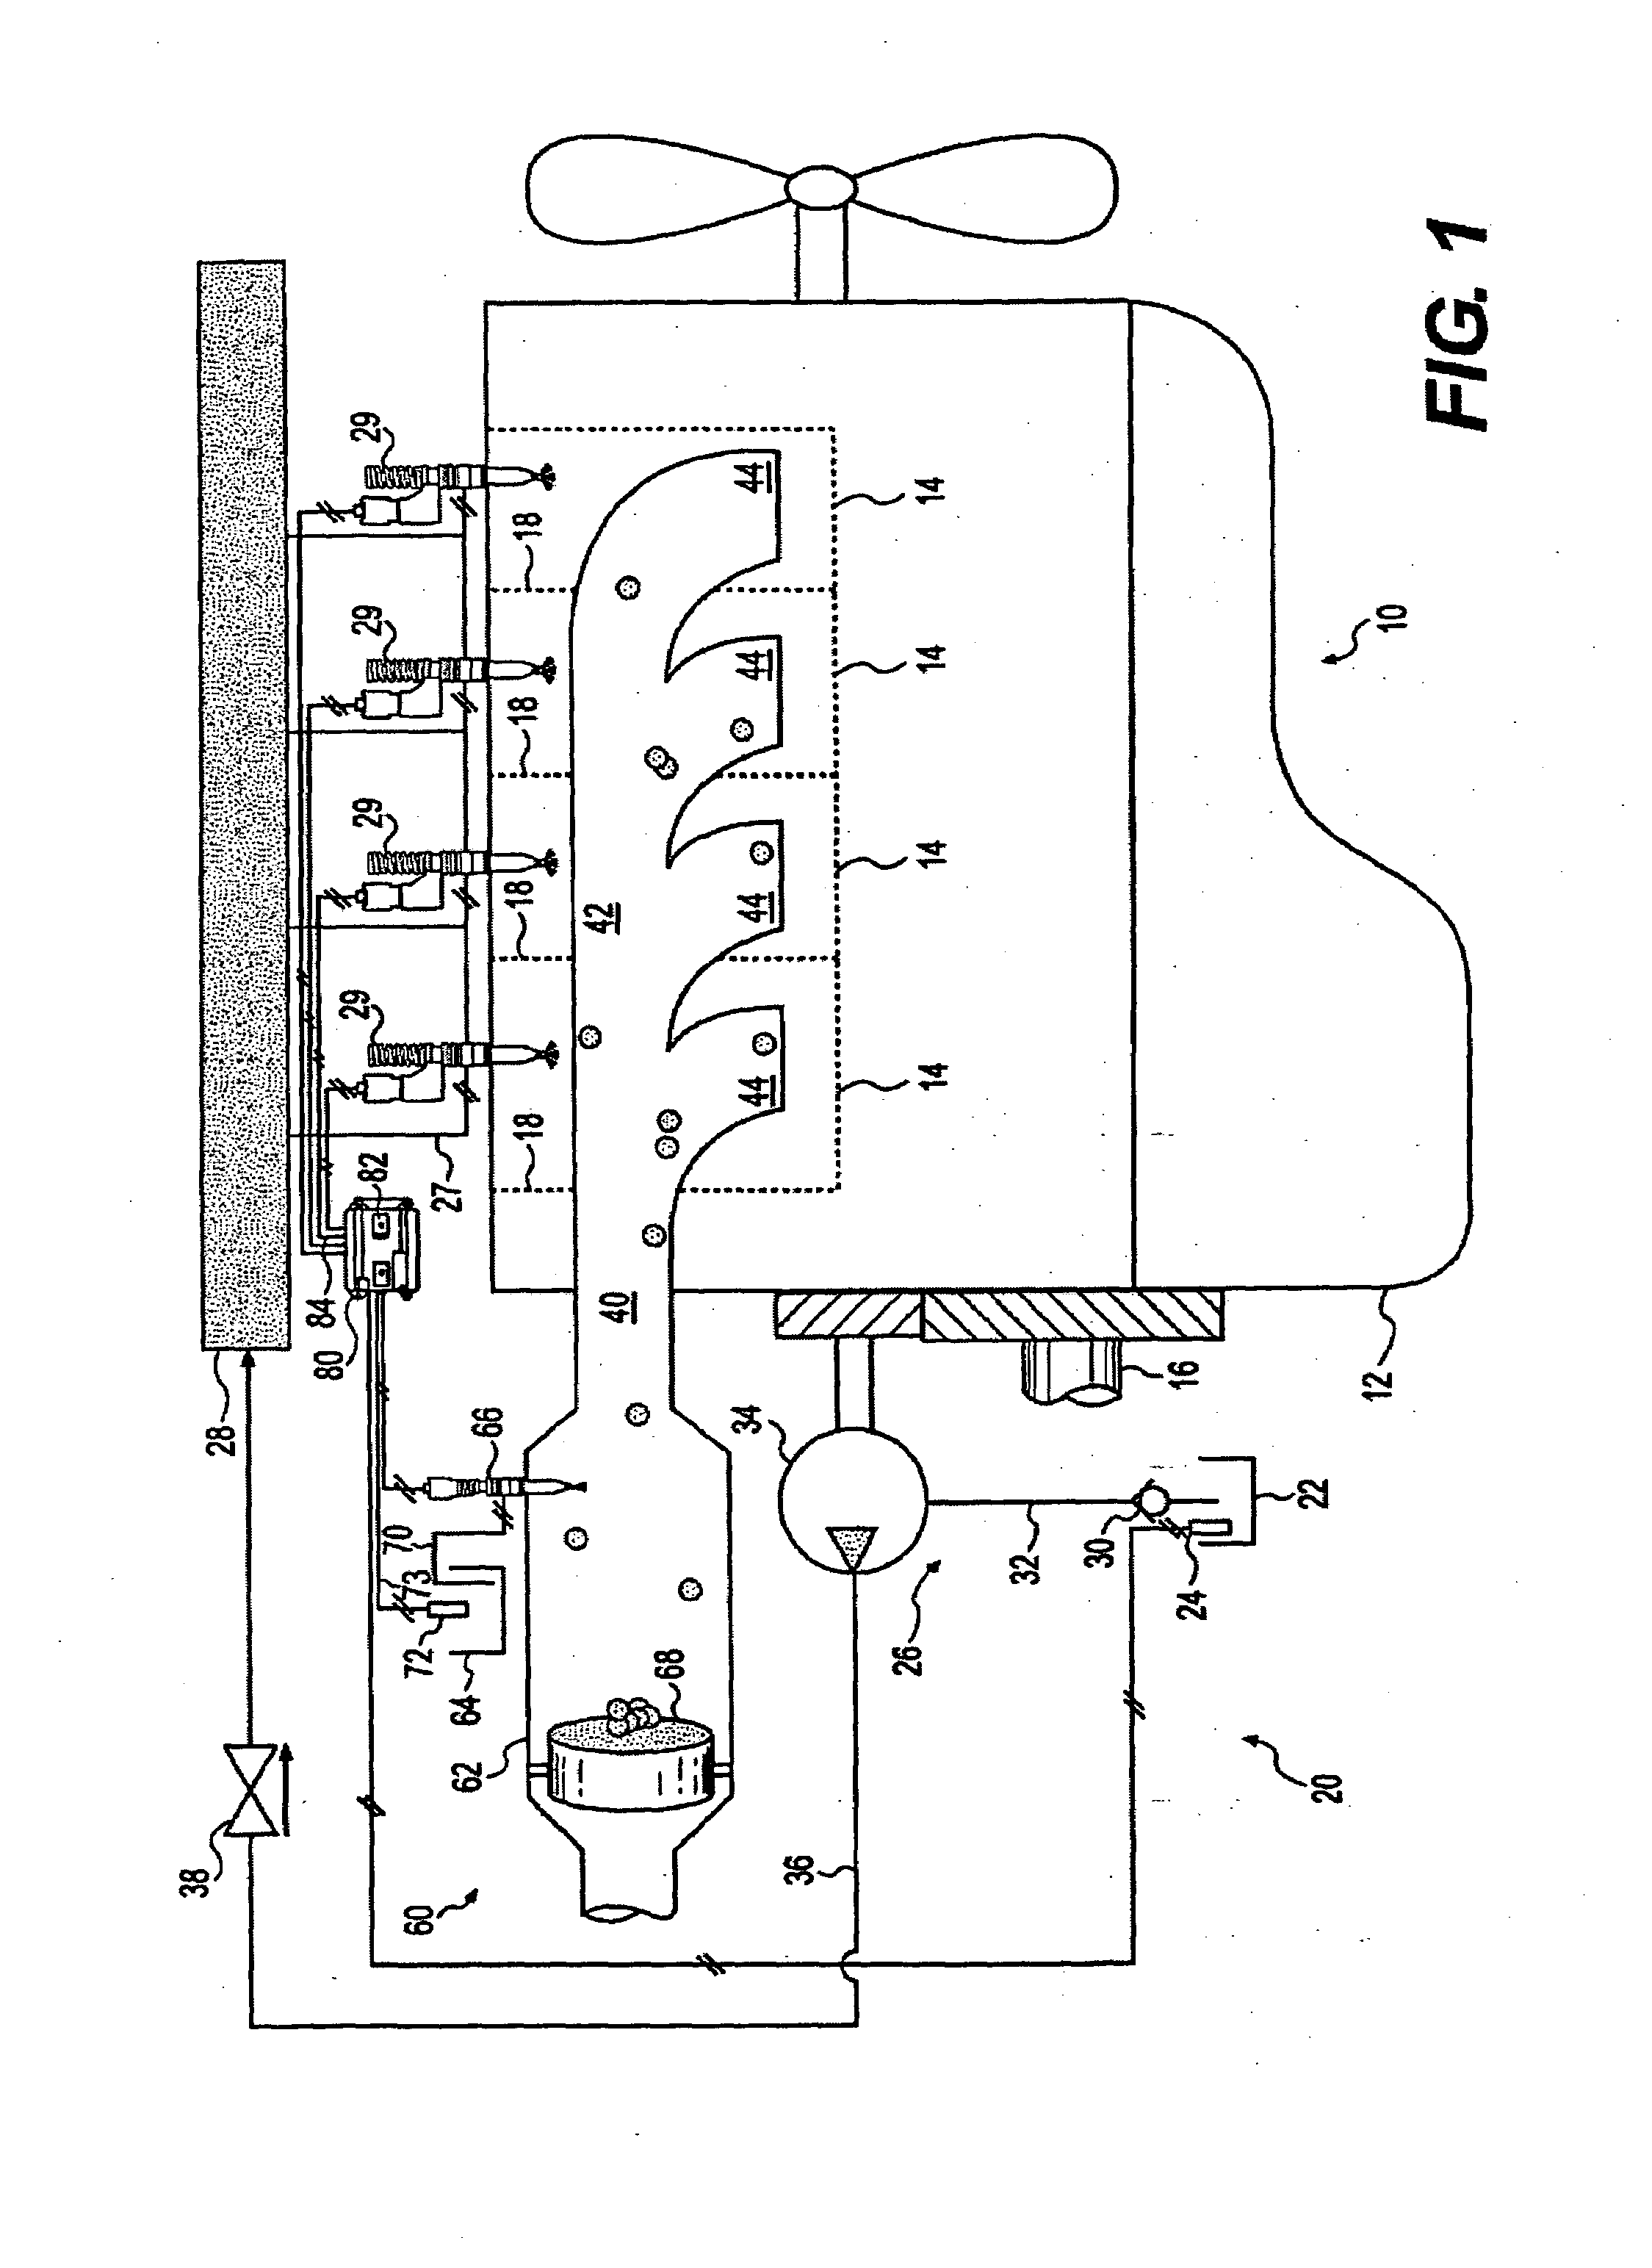 System implementing low-reductant engine operation mode